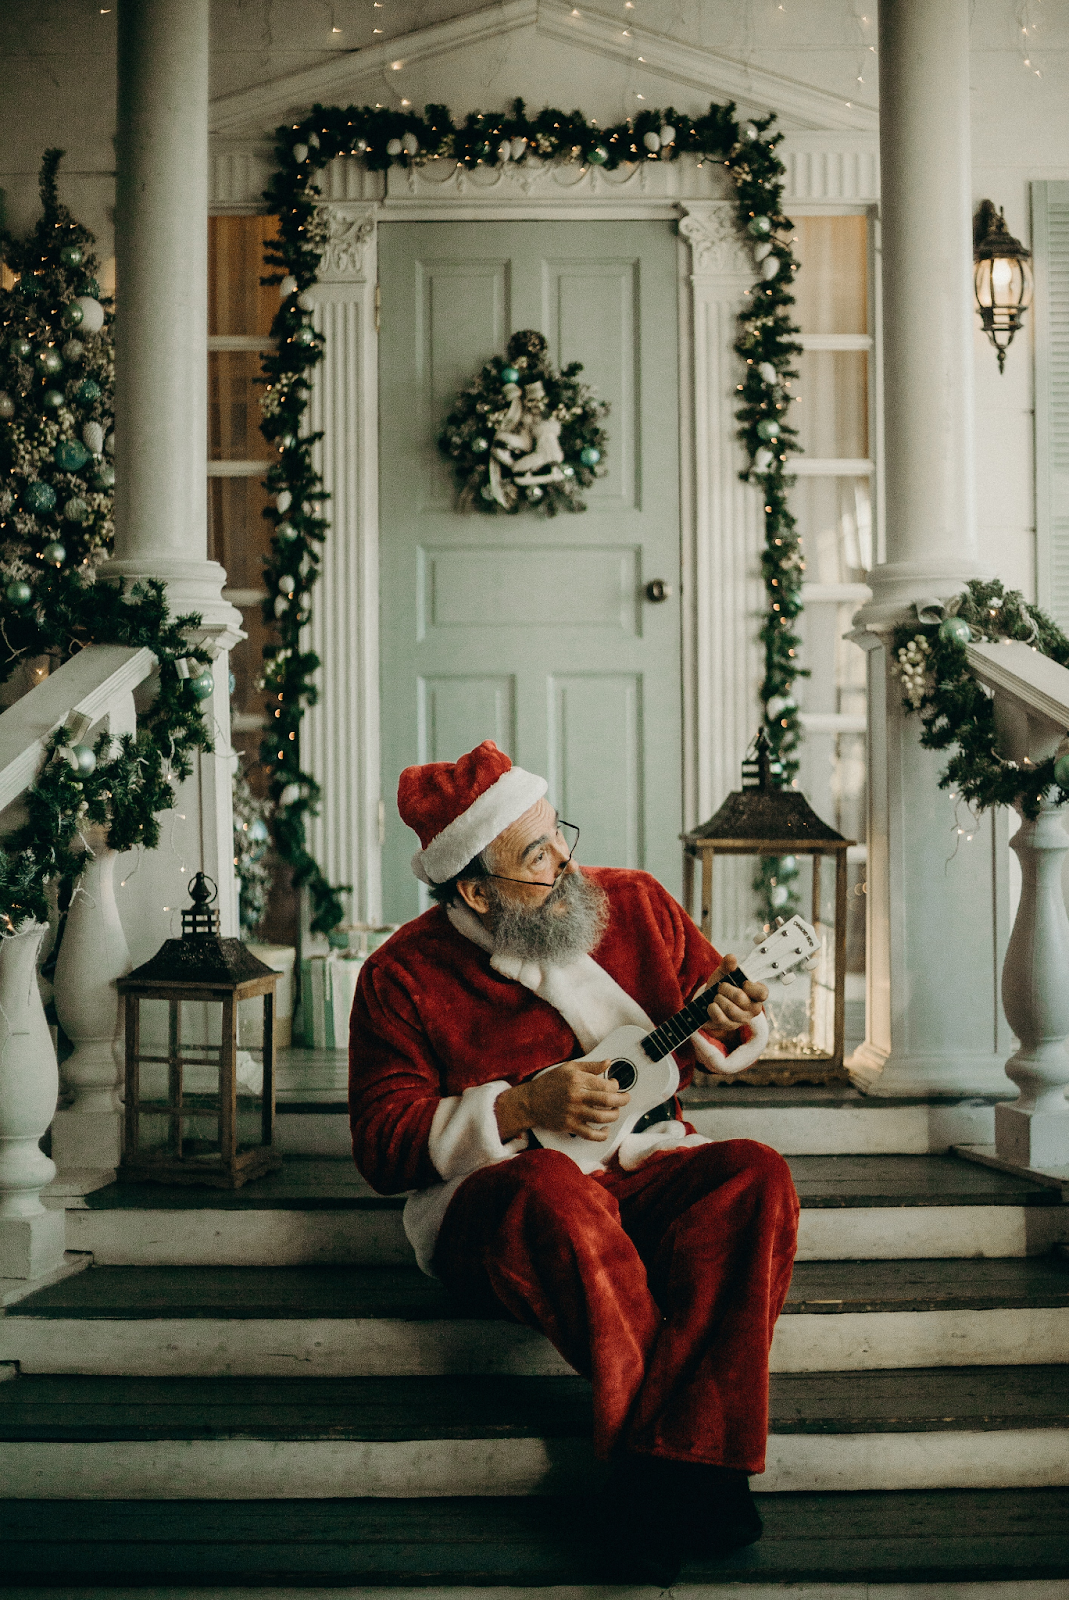 Santa Clause sitting on the porch and playing a small guitar in front of a Christmas decorated house